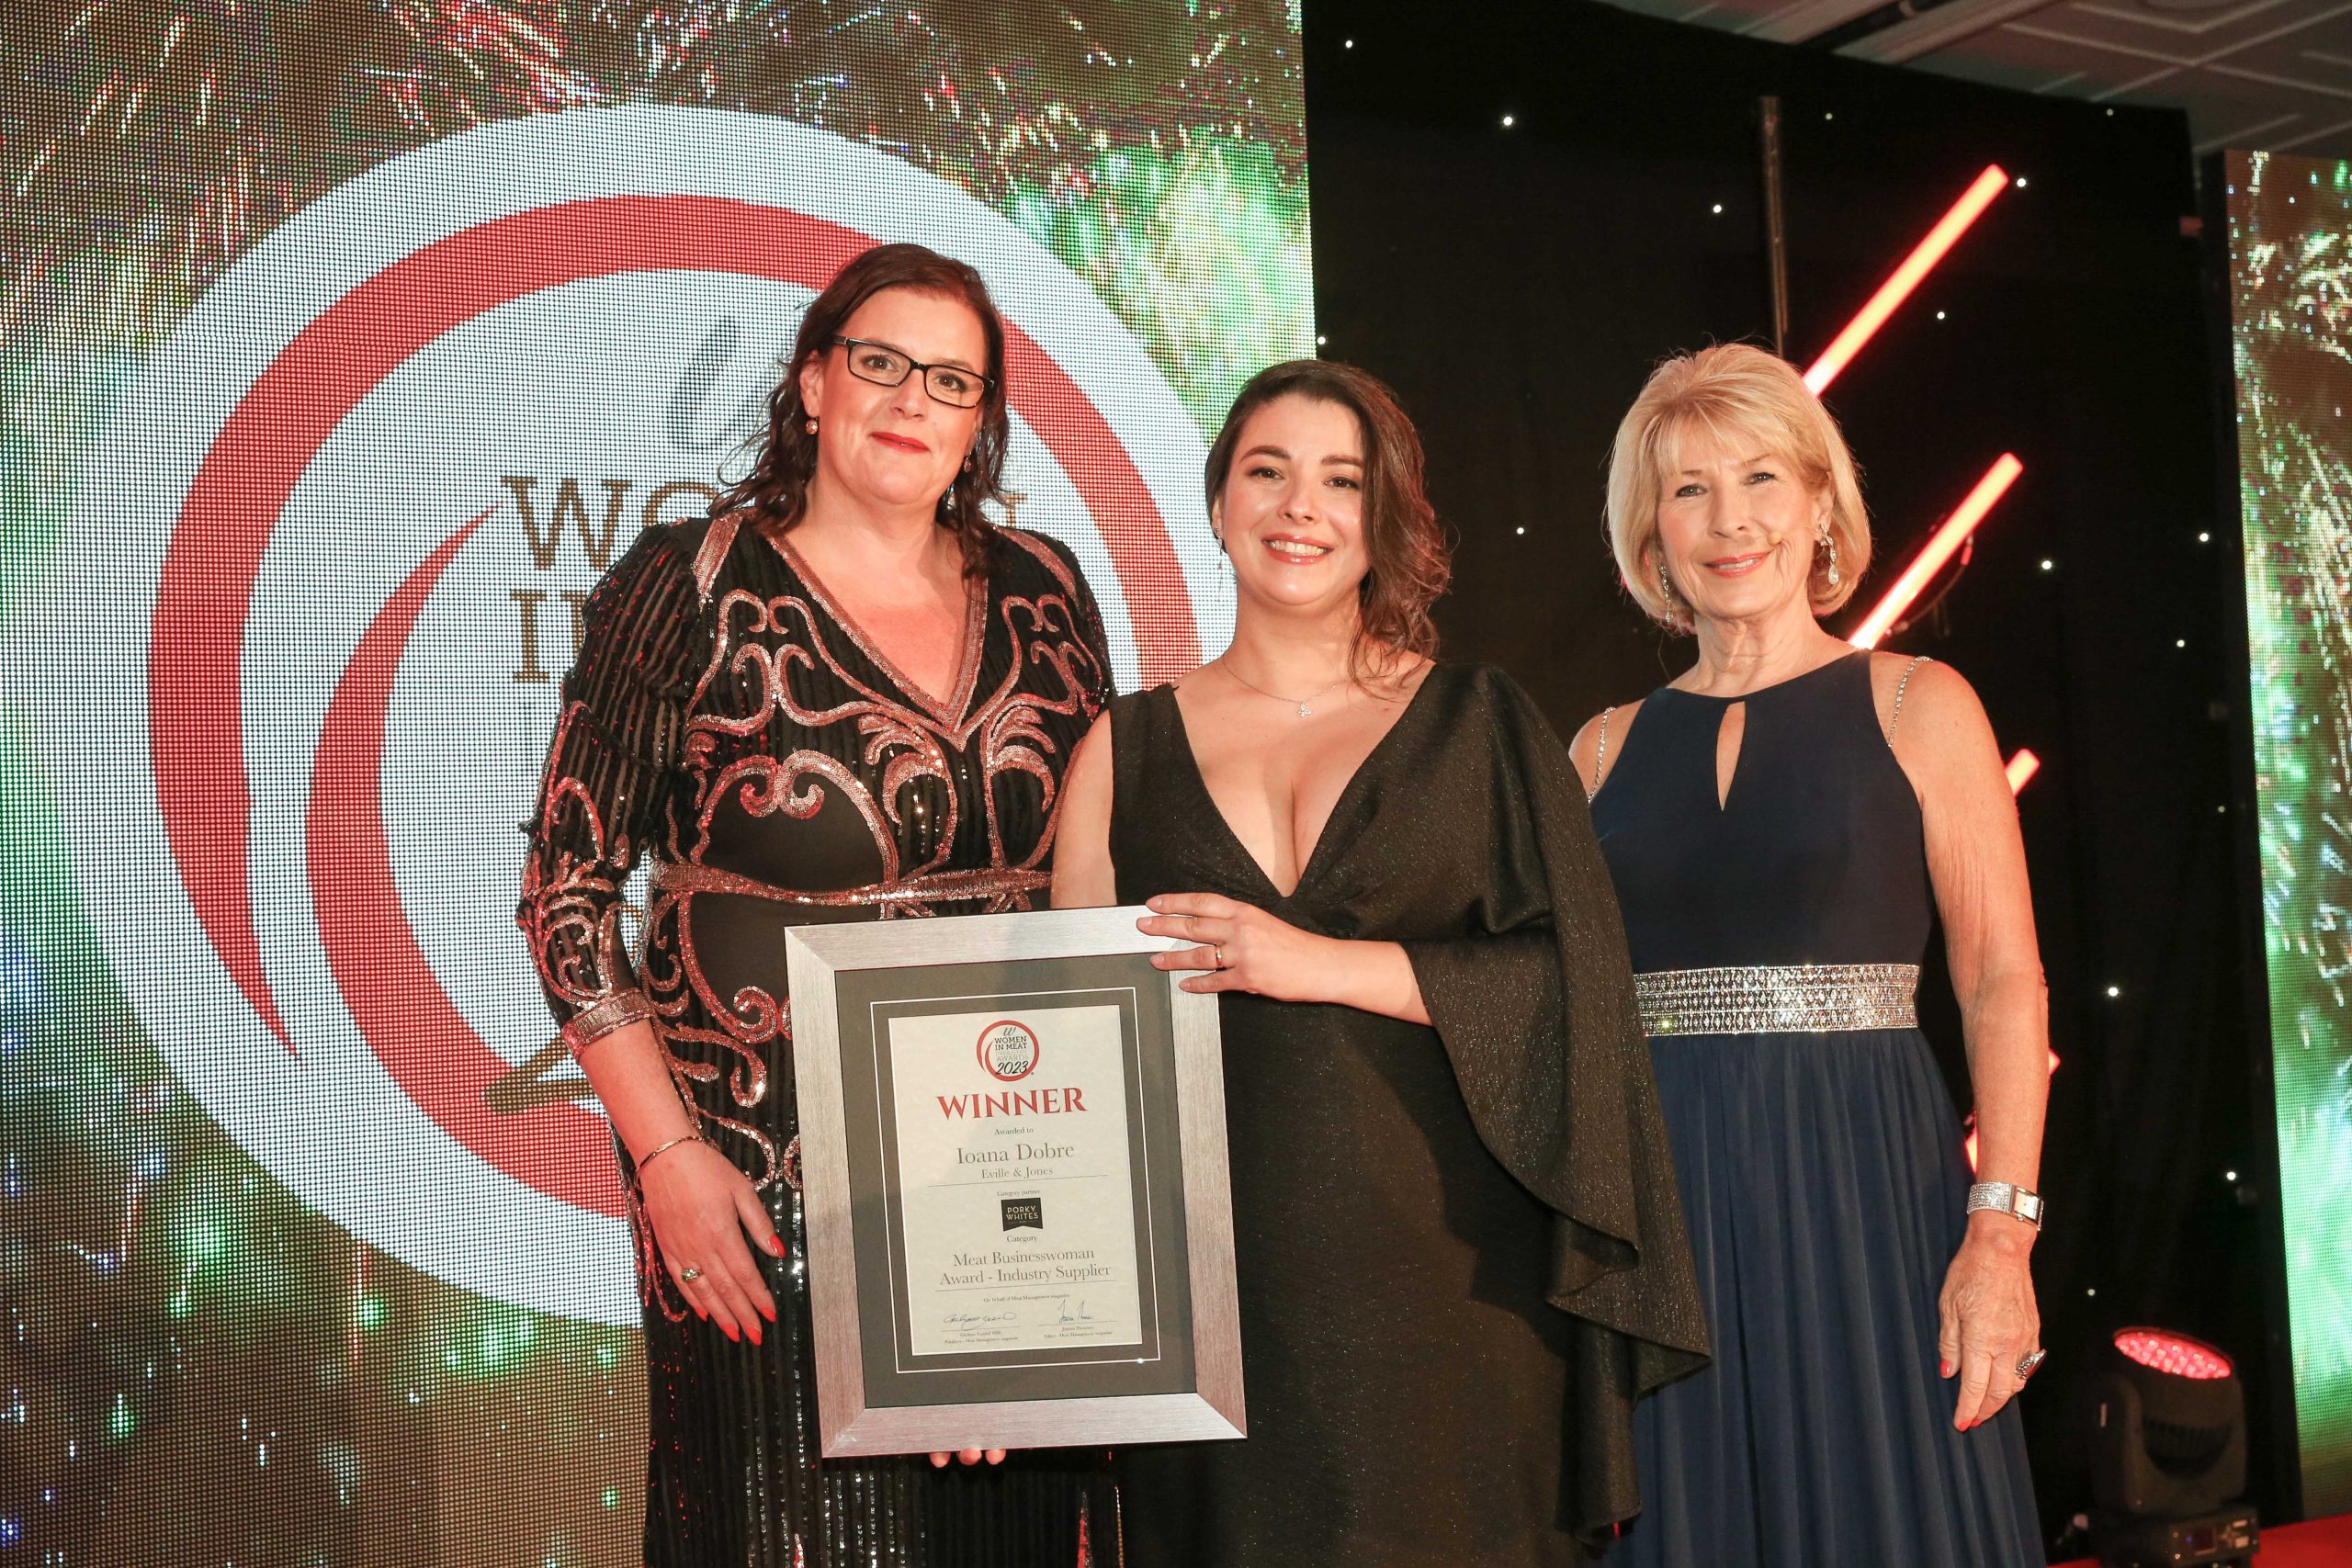 MEAT BUSINESSWOMAN AWARD: RETAILING - (l-r) Award partner Duncan Spencer Brown of Foods Connected, Kathryn Meadows of Nicholson’s Butchers and Katharine Merry.